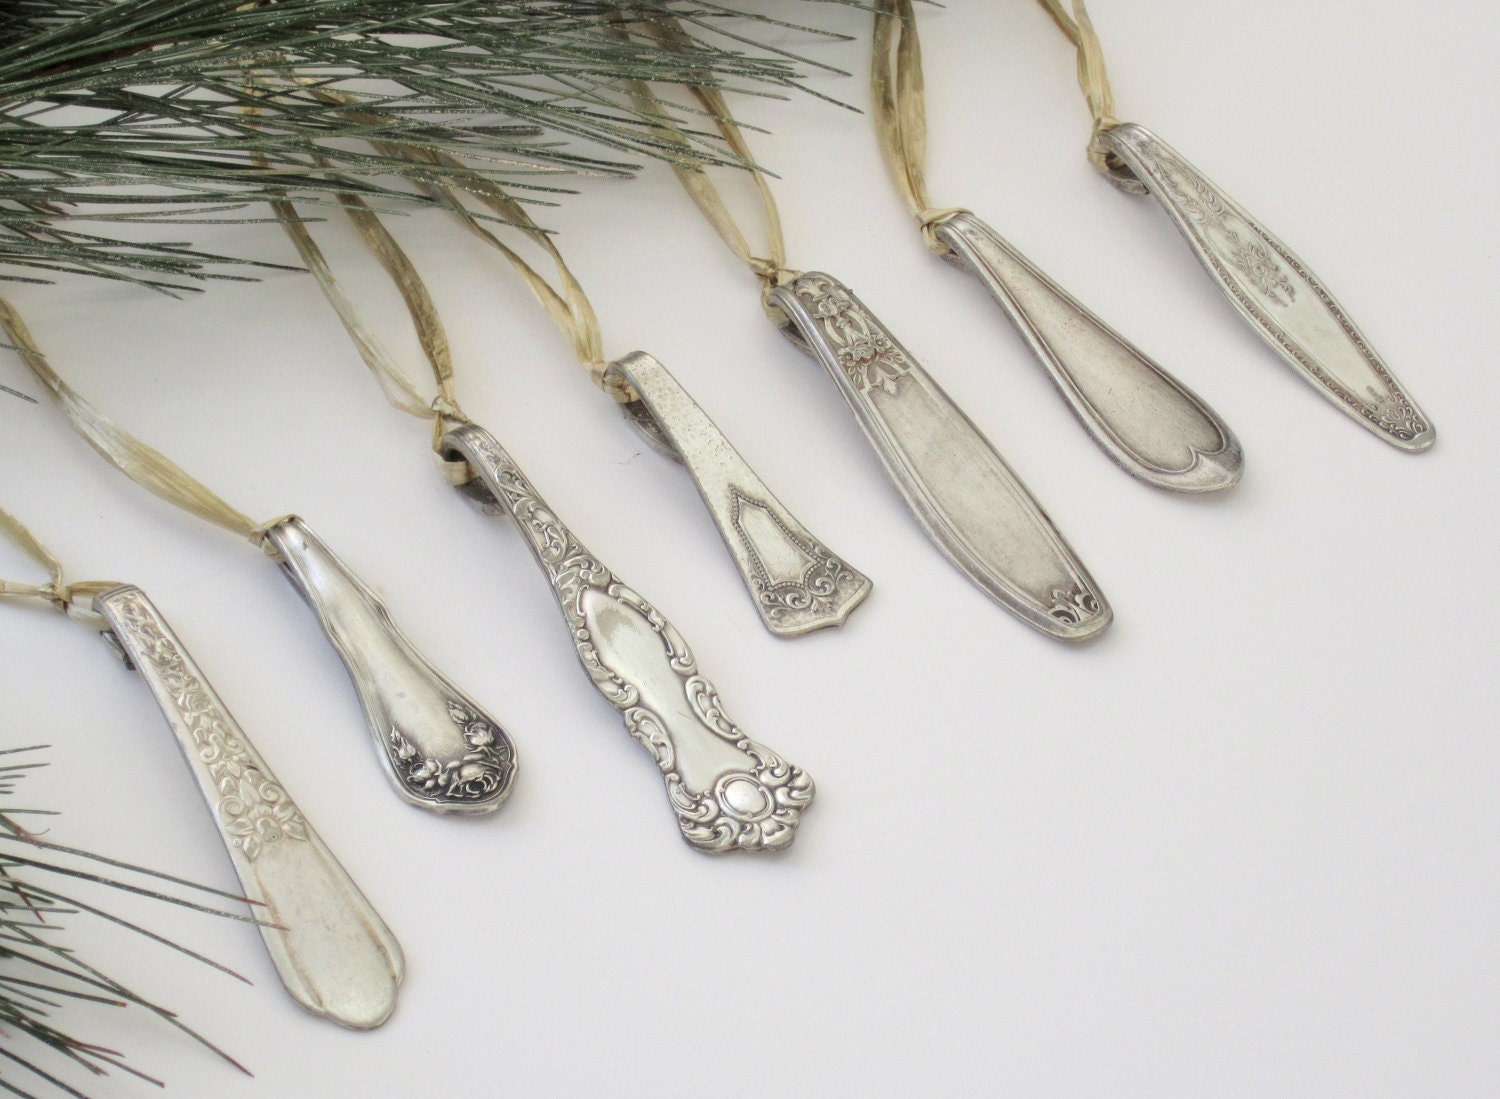 Gift set of 10 Antique Silver Spoon Ornaments